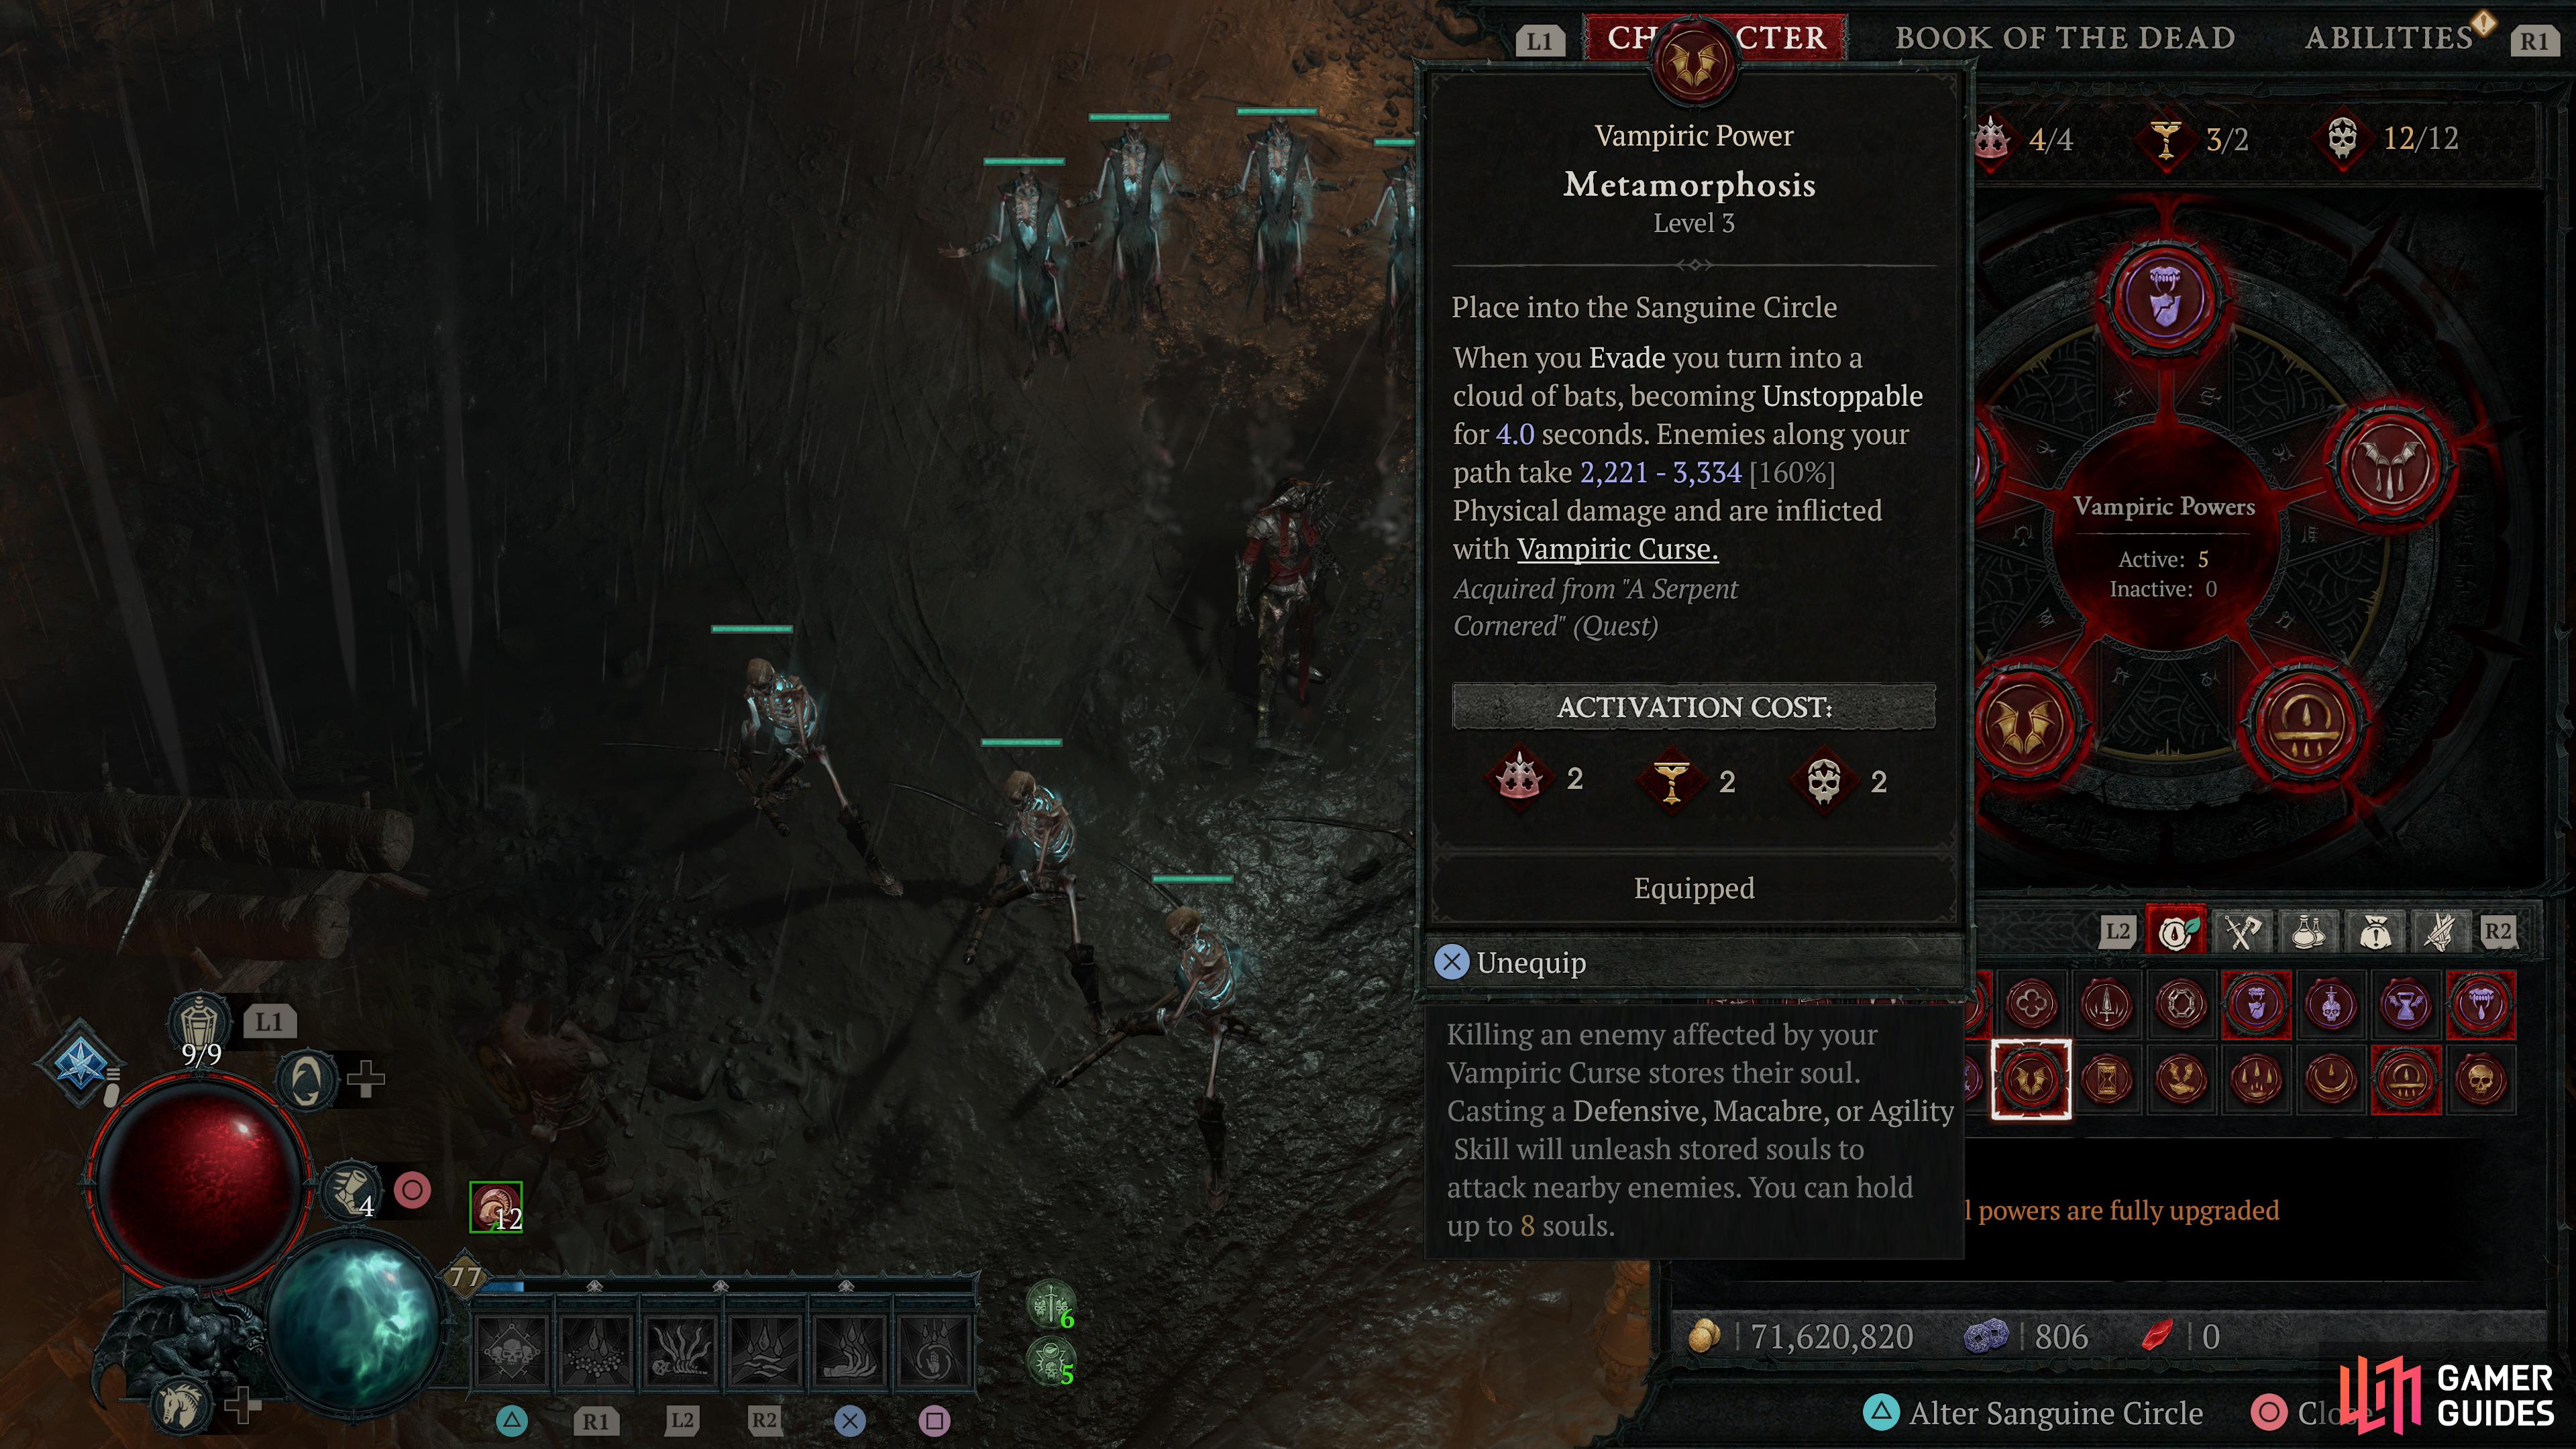 Several vampiric powers inflict - or benefit from - the Vampiric Curse debuff.